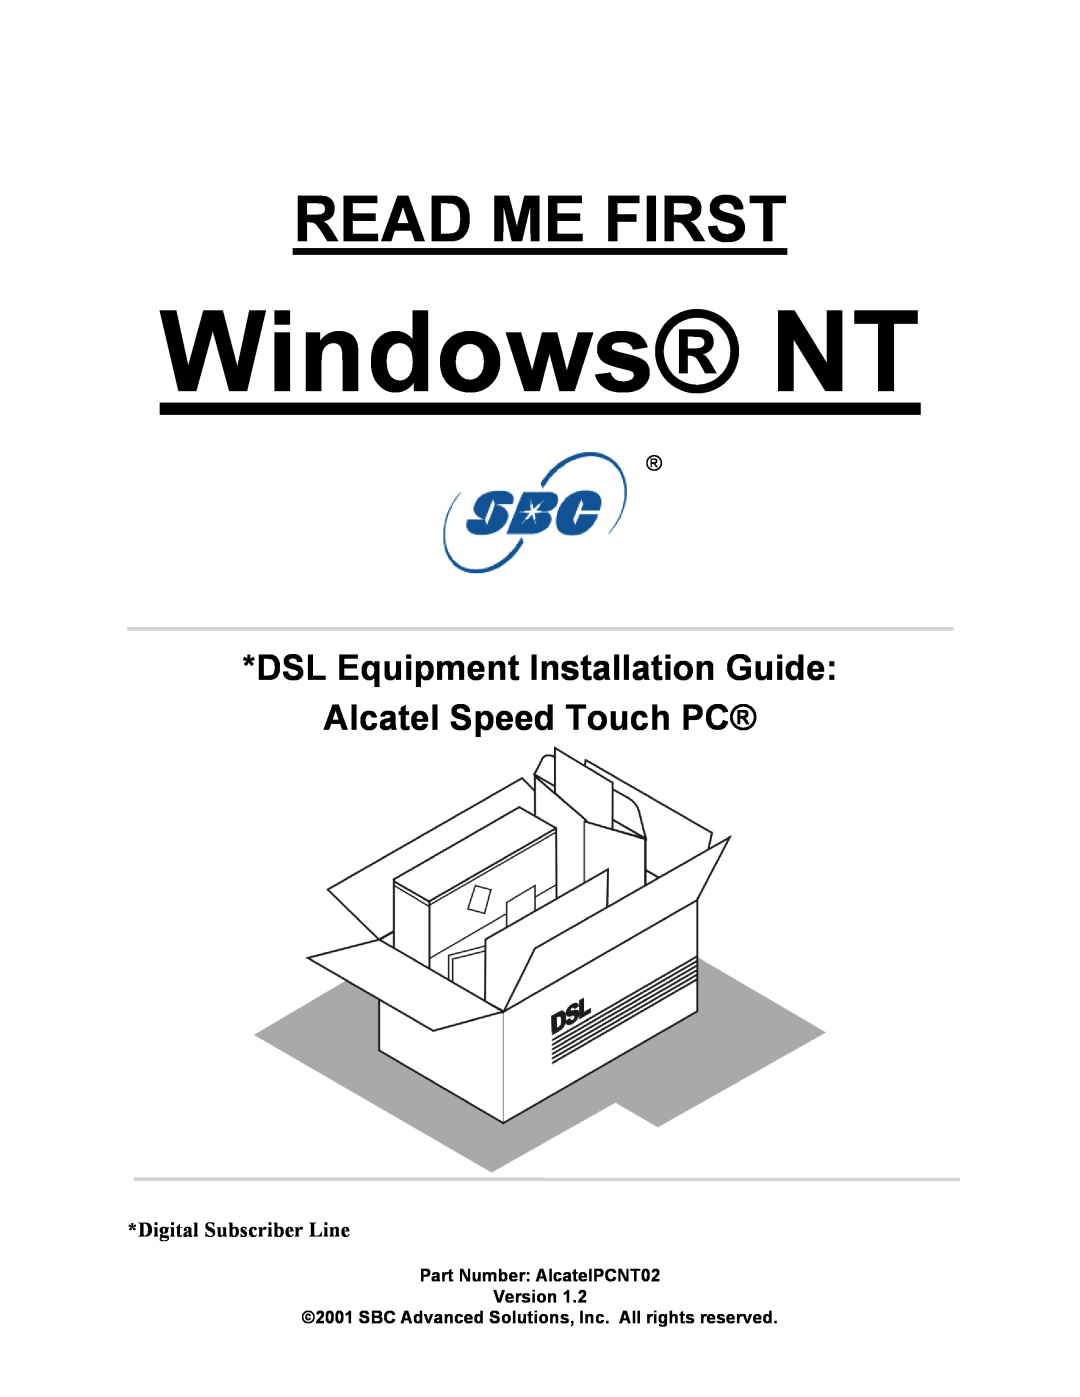 SBC comm PCNT02 manual Windows NT, Read Me First, DSL Equipment Installation Guide Alcatel Speed Touch PC 